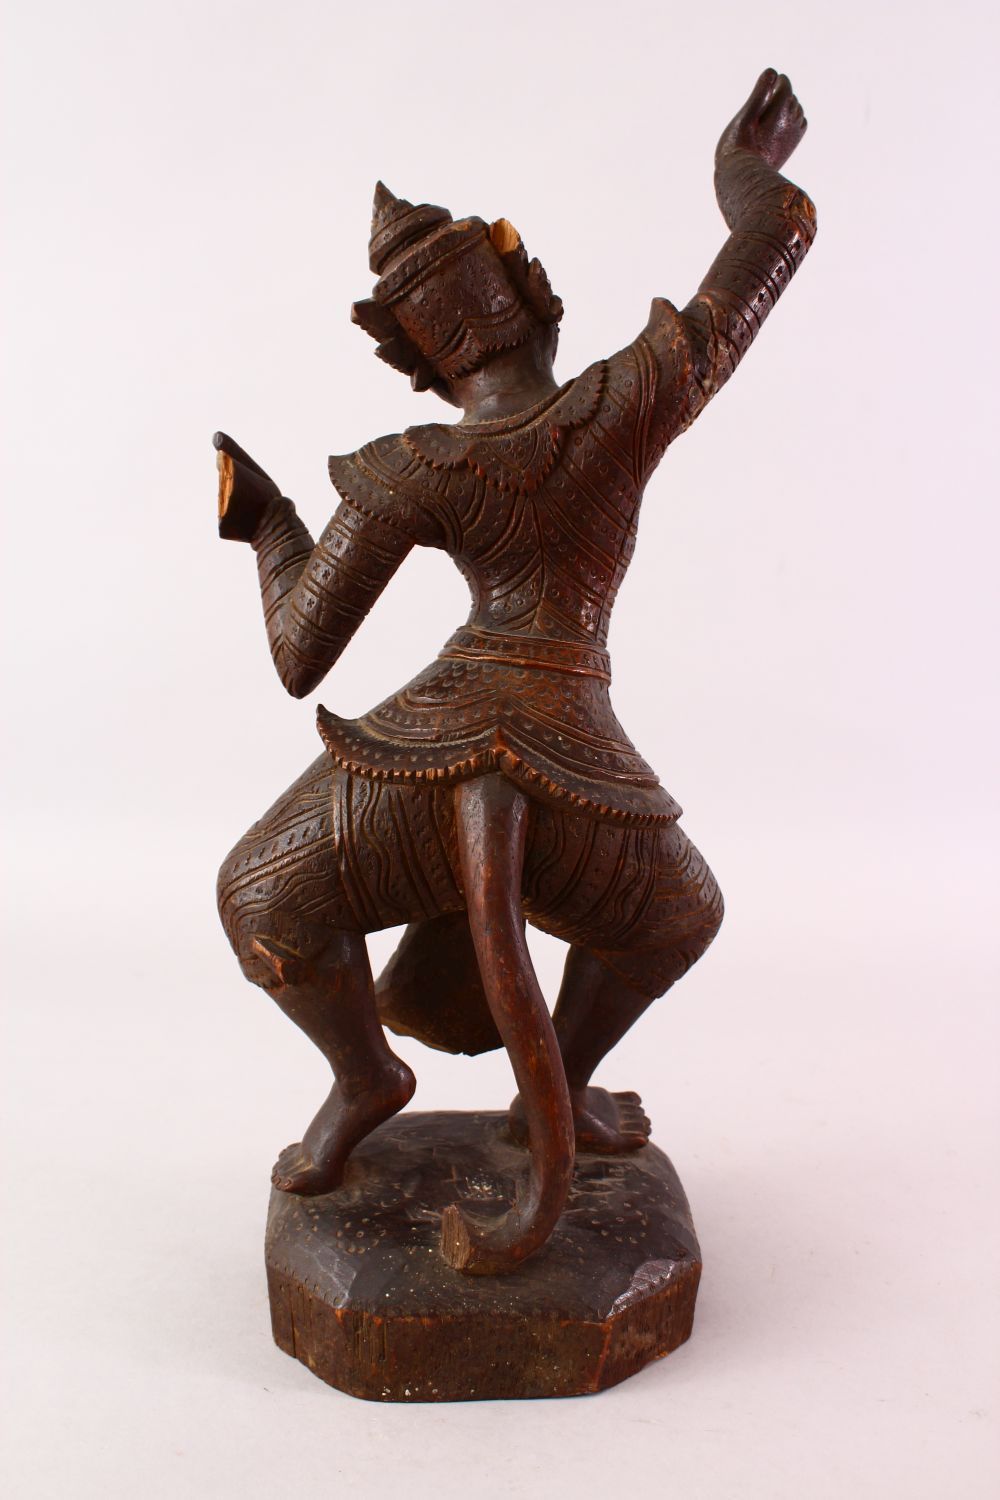 A GOOD 19TH CENTURY OR EARLIER BURMESE CARVED WOODEN FIGURE OF A DEITY, 48cm high. - Image 4 of 8